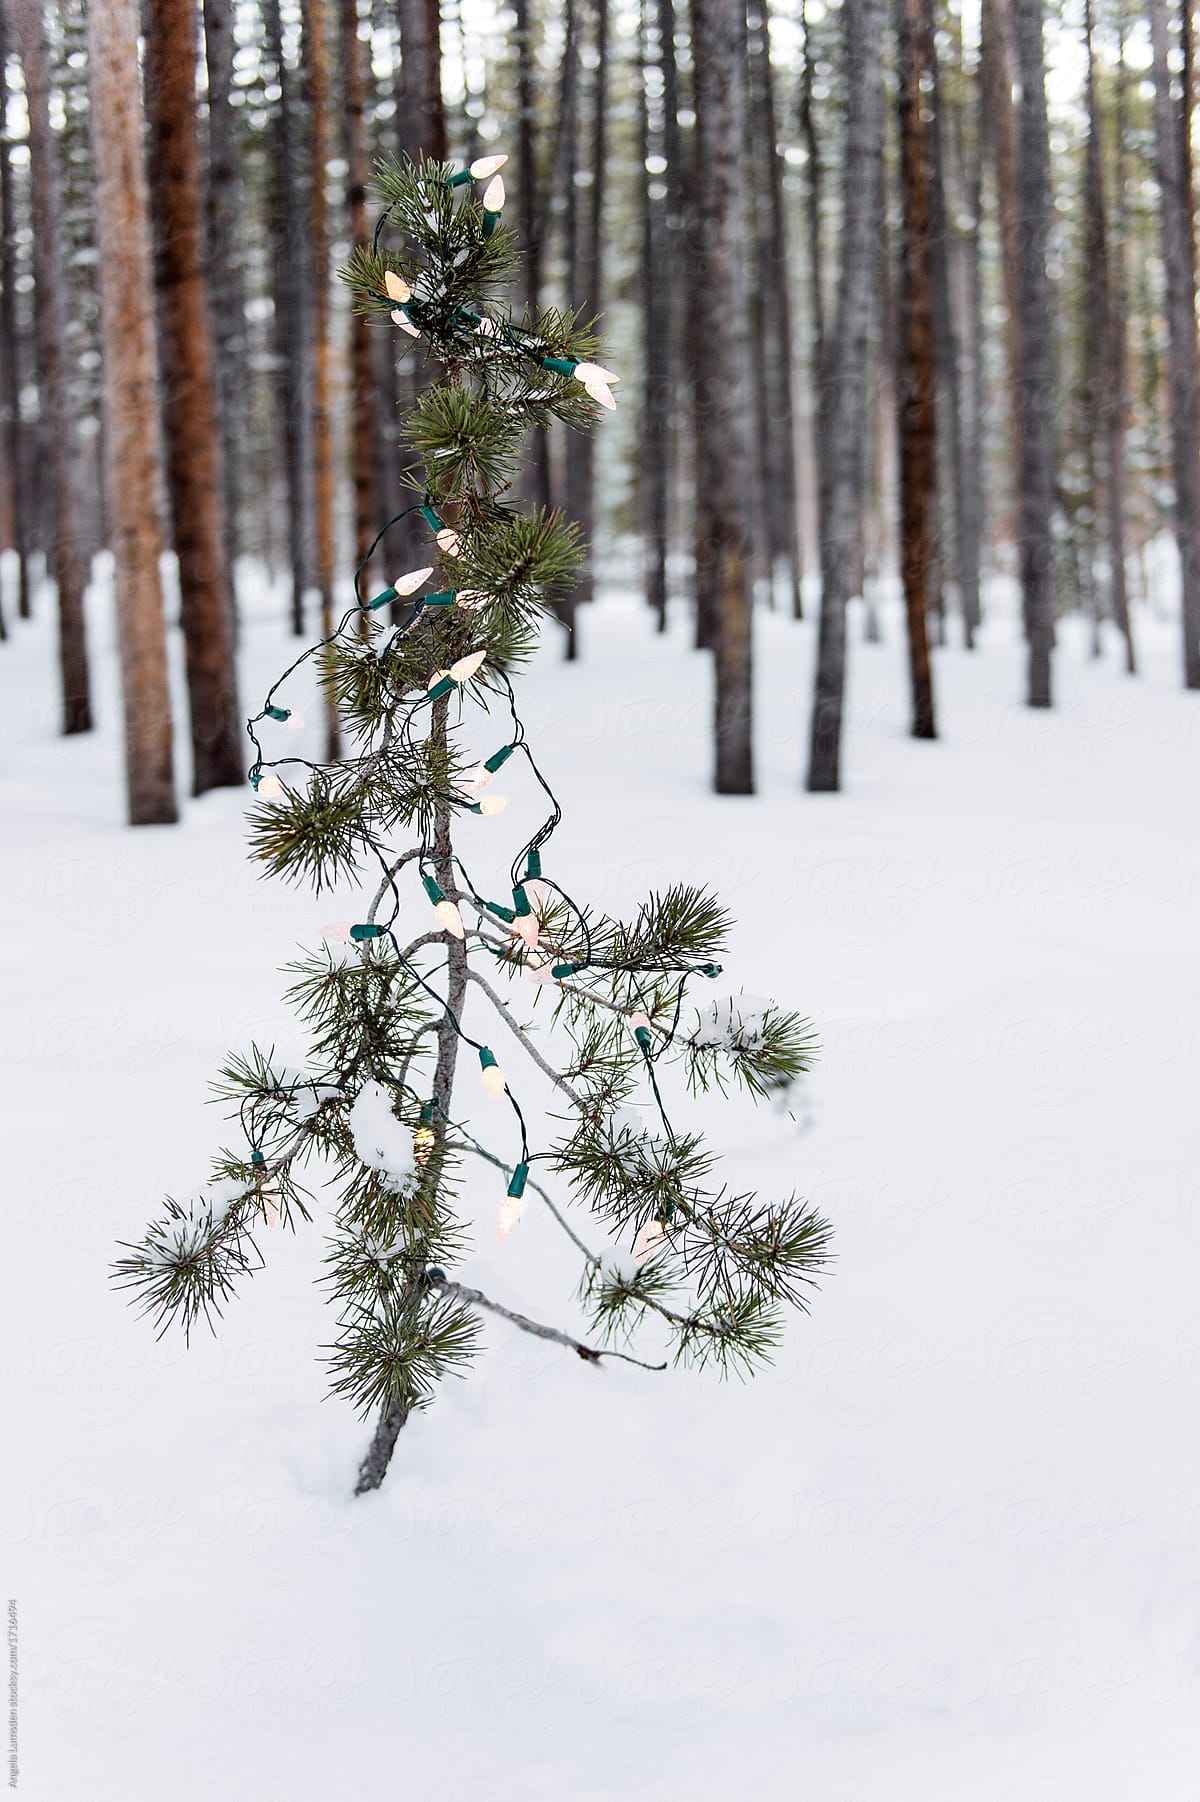 A baby pine with lights in deep snow